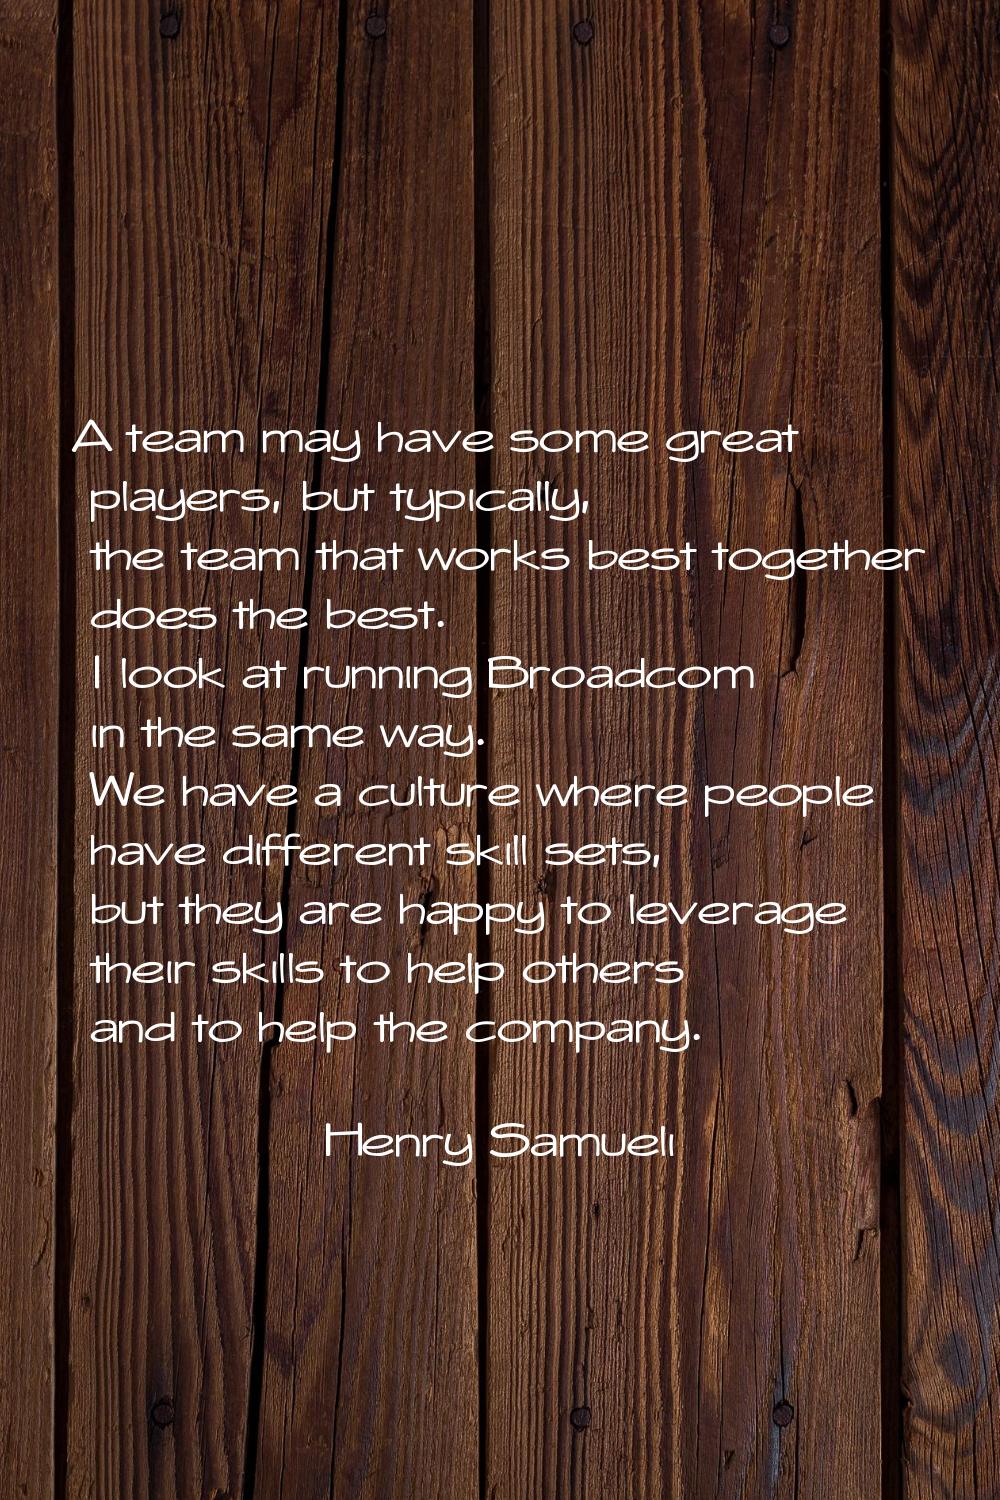 A team may have some great players, but typically, the team that works best together does the best.